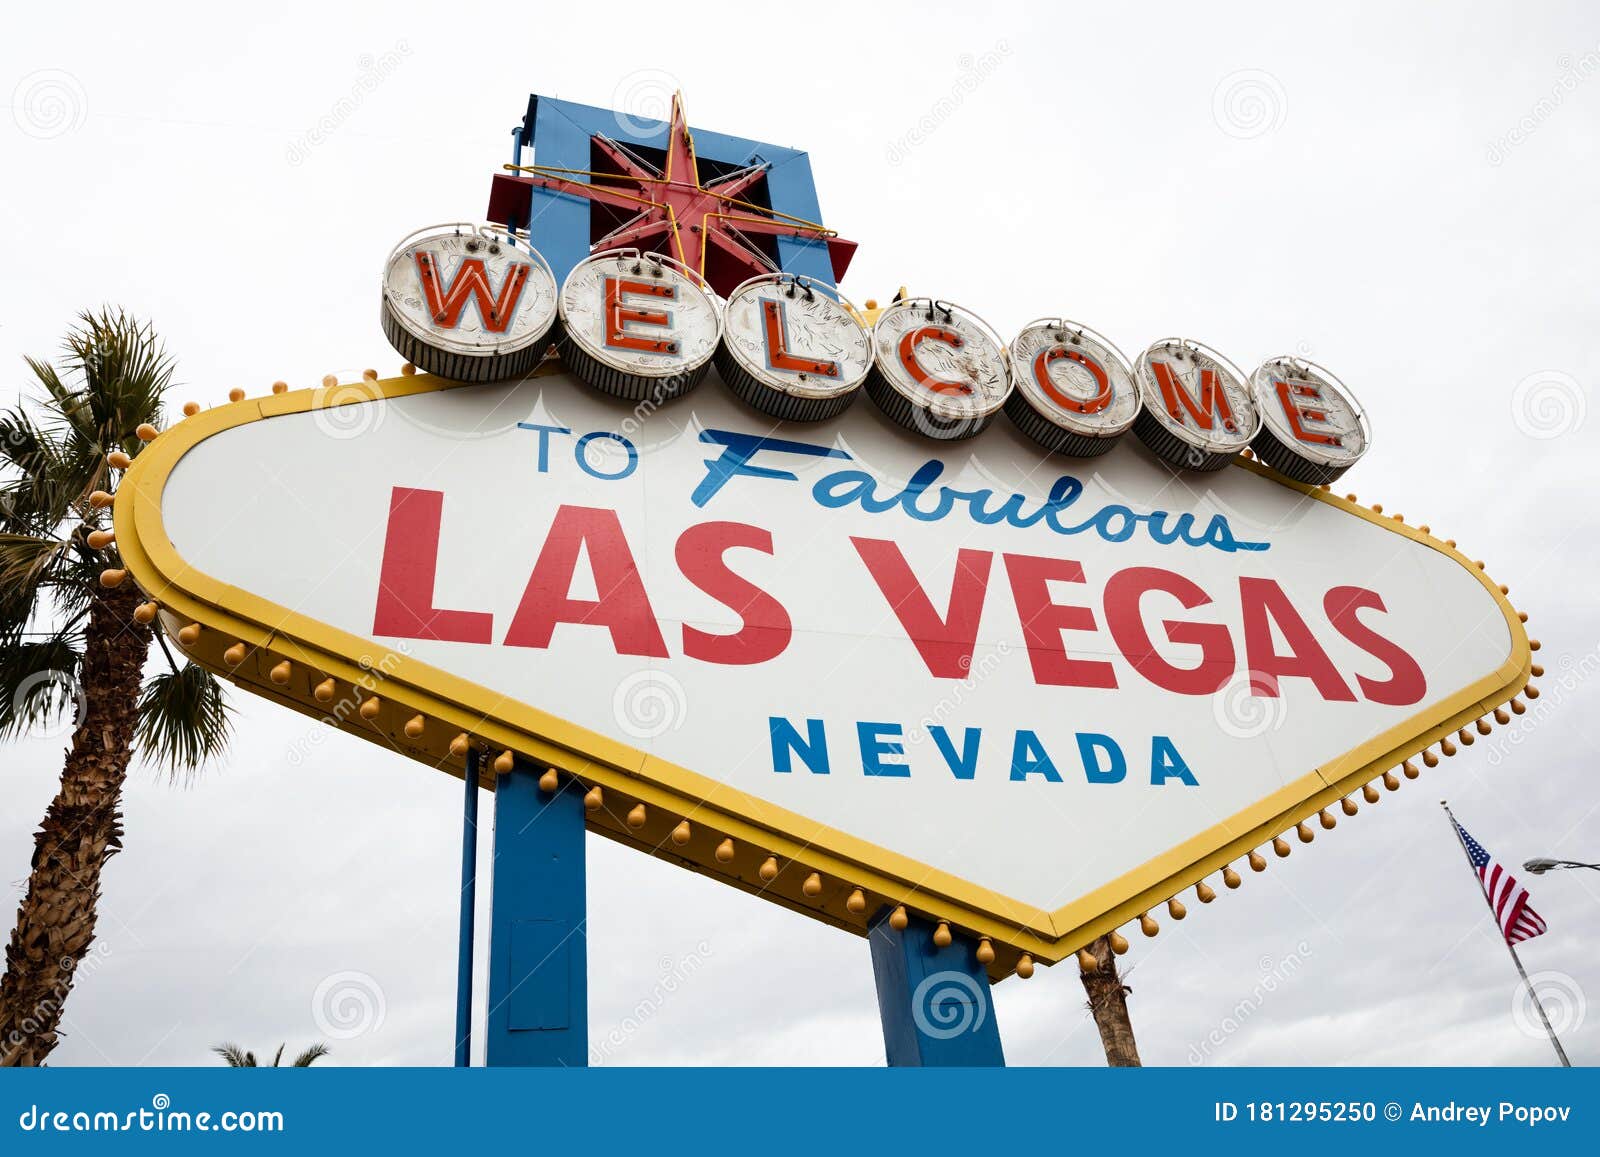 Nevada State Clipart-welcome las vegas nevada sign